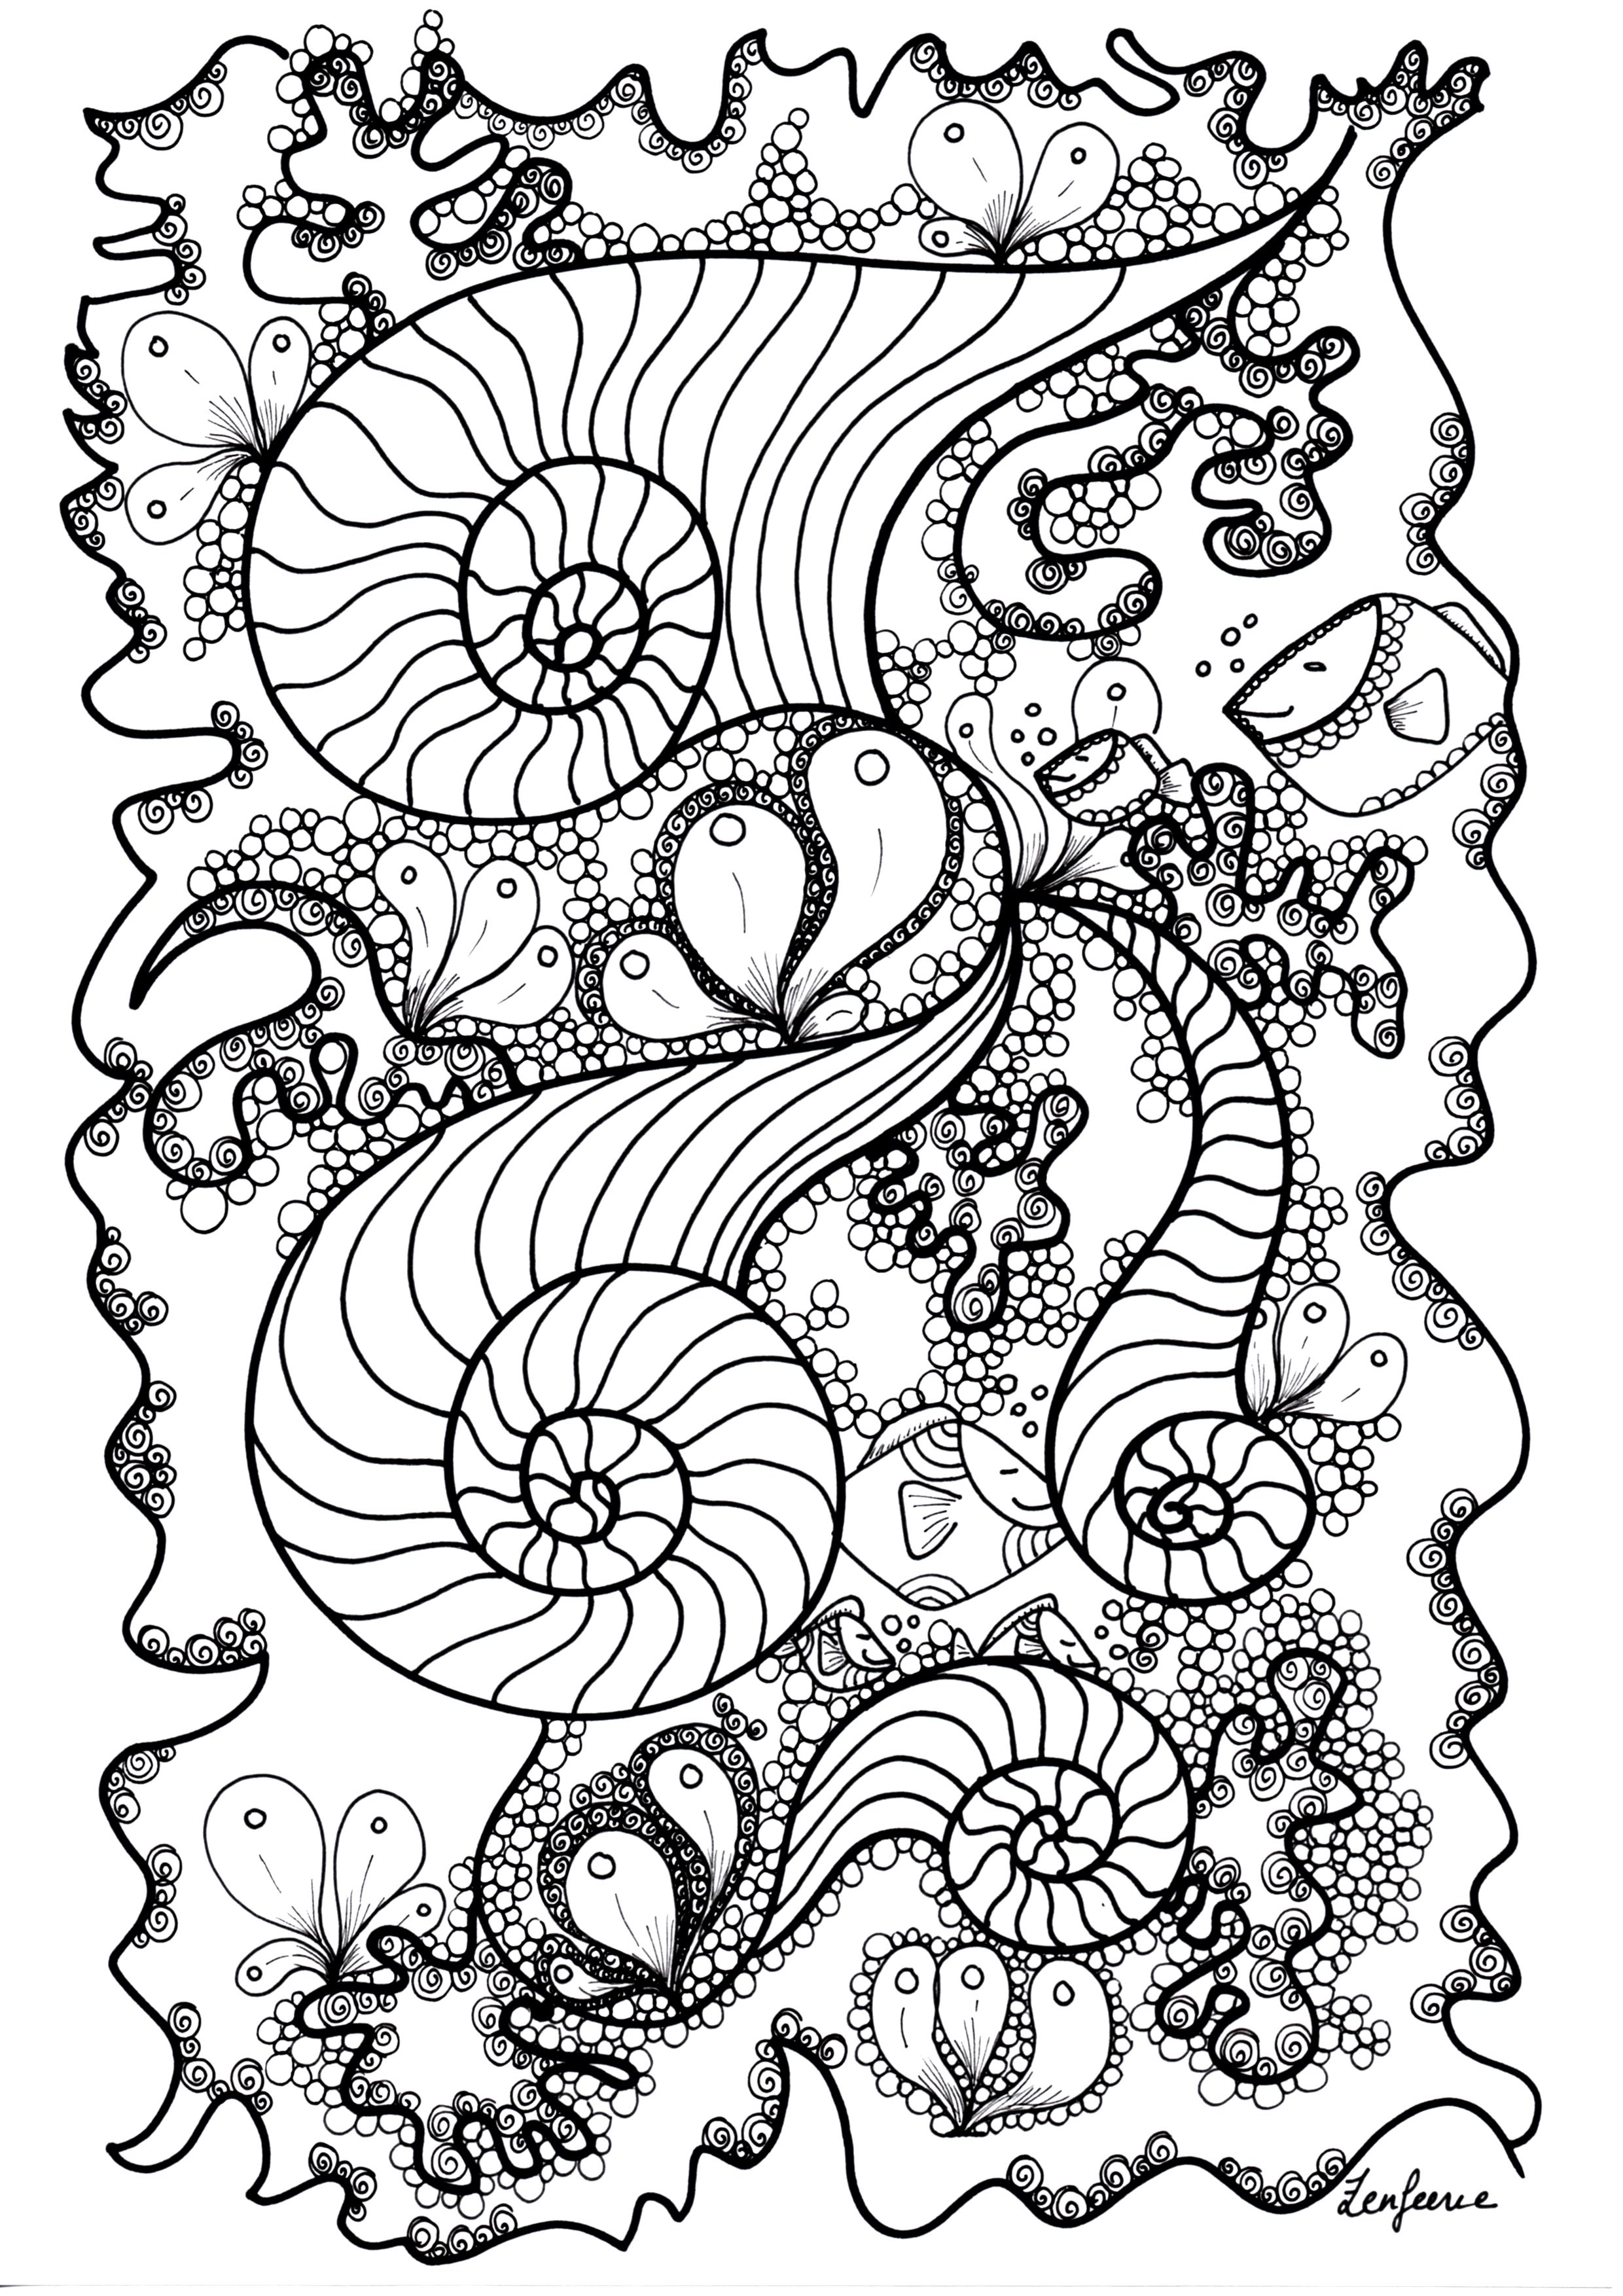 Free Adult coloring page to print and color